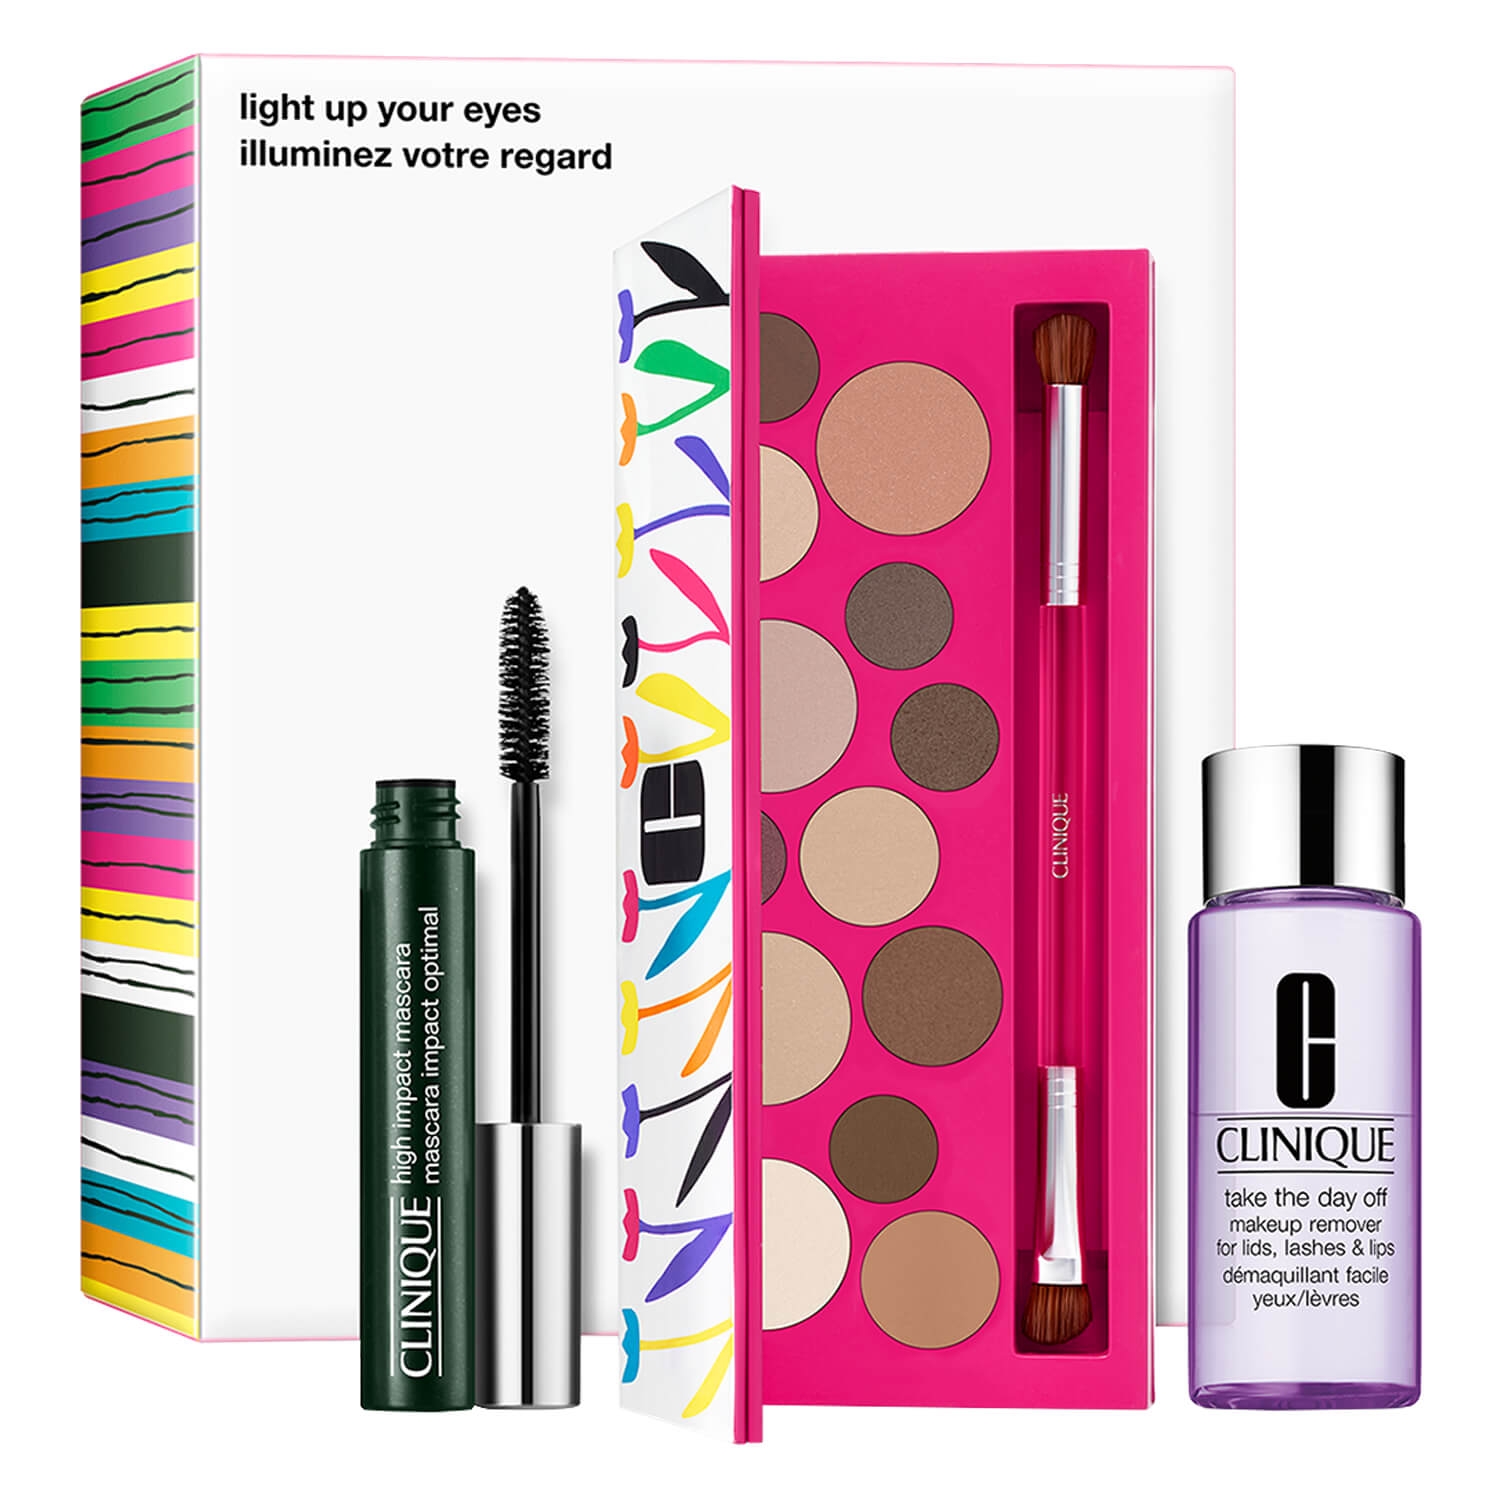 Product image from Clinique Set - Light Up Your Eyes